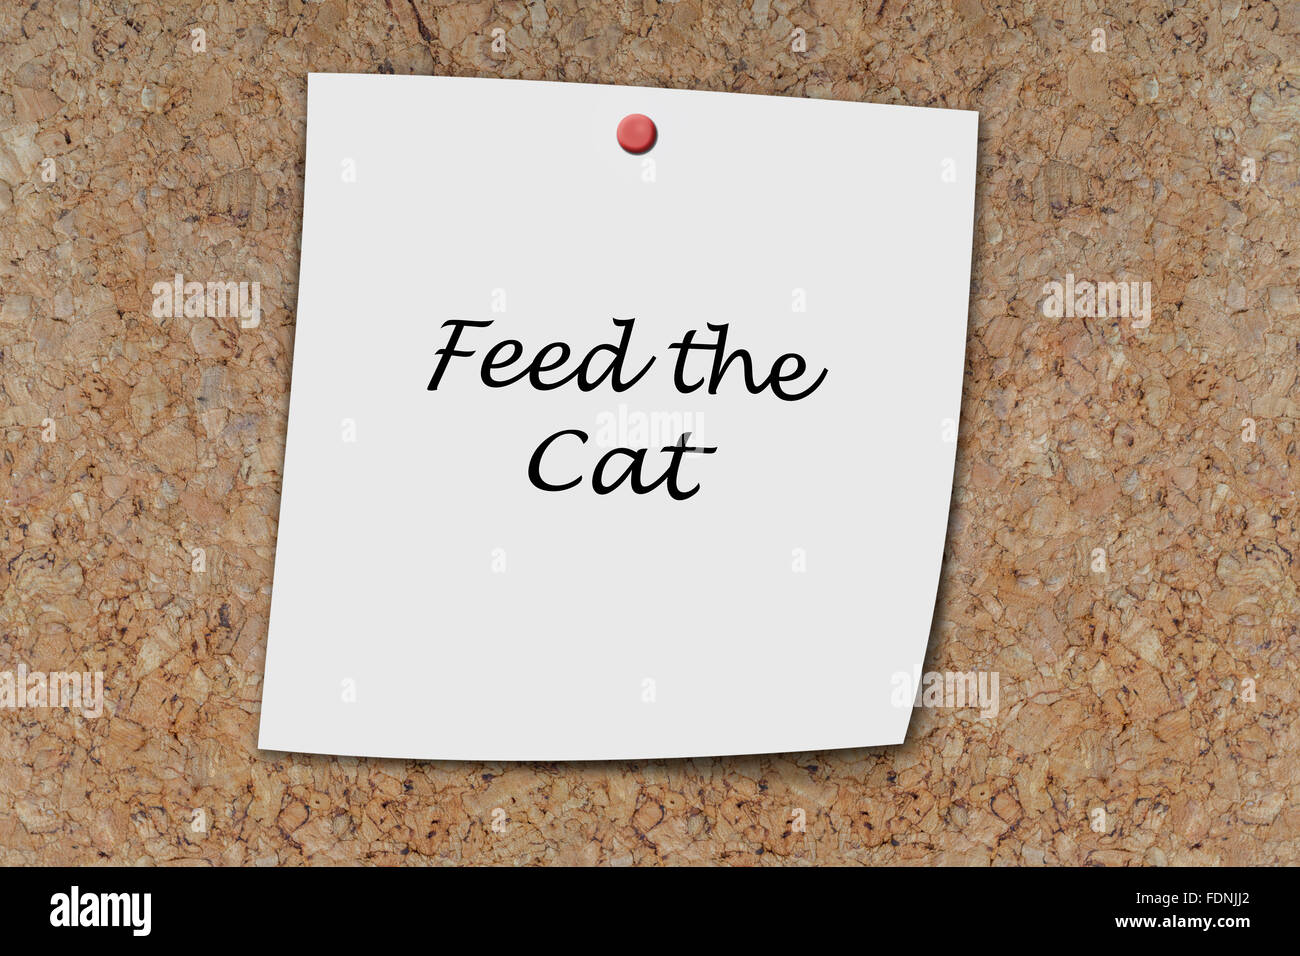 Feed the cat written on a memo pinned on a cork board Stock Photo